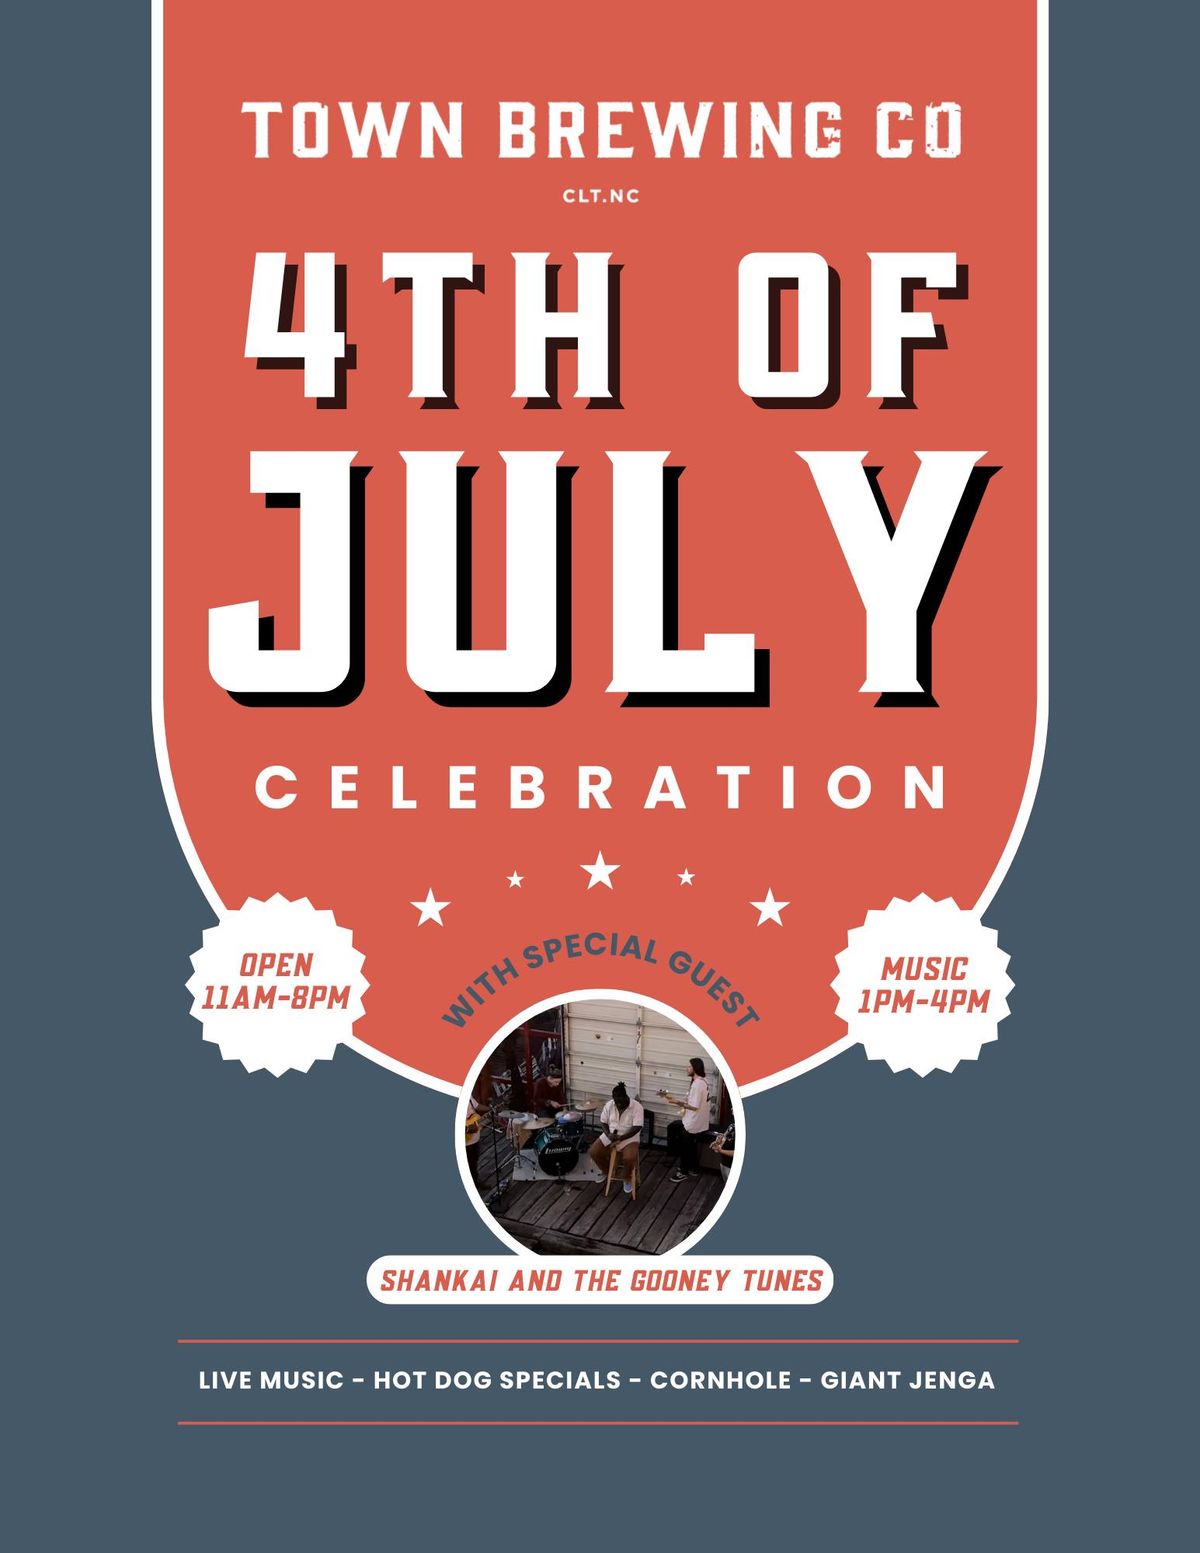 Fourth of July Celebration at Town Brewing